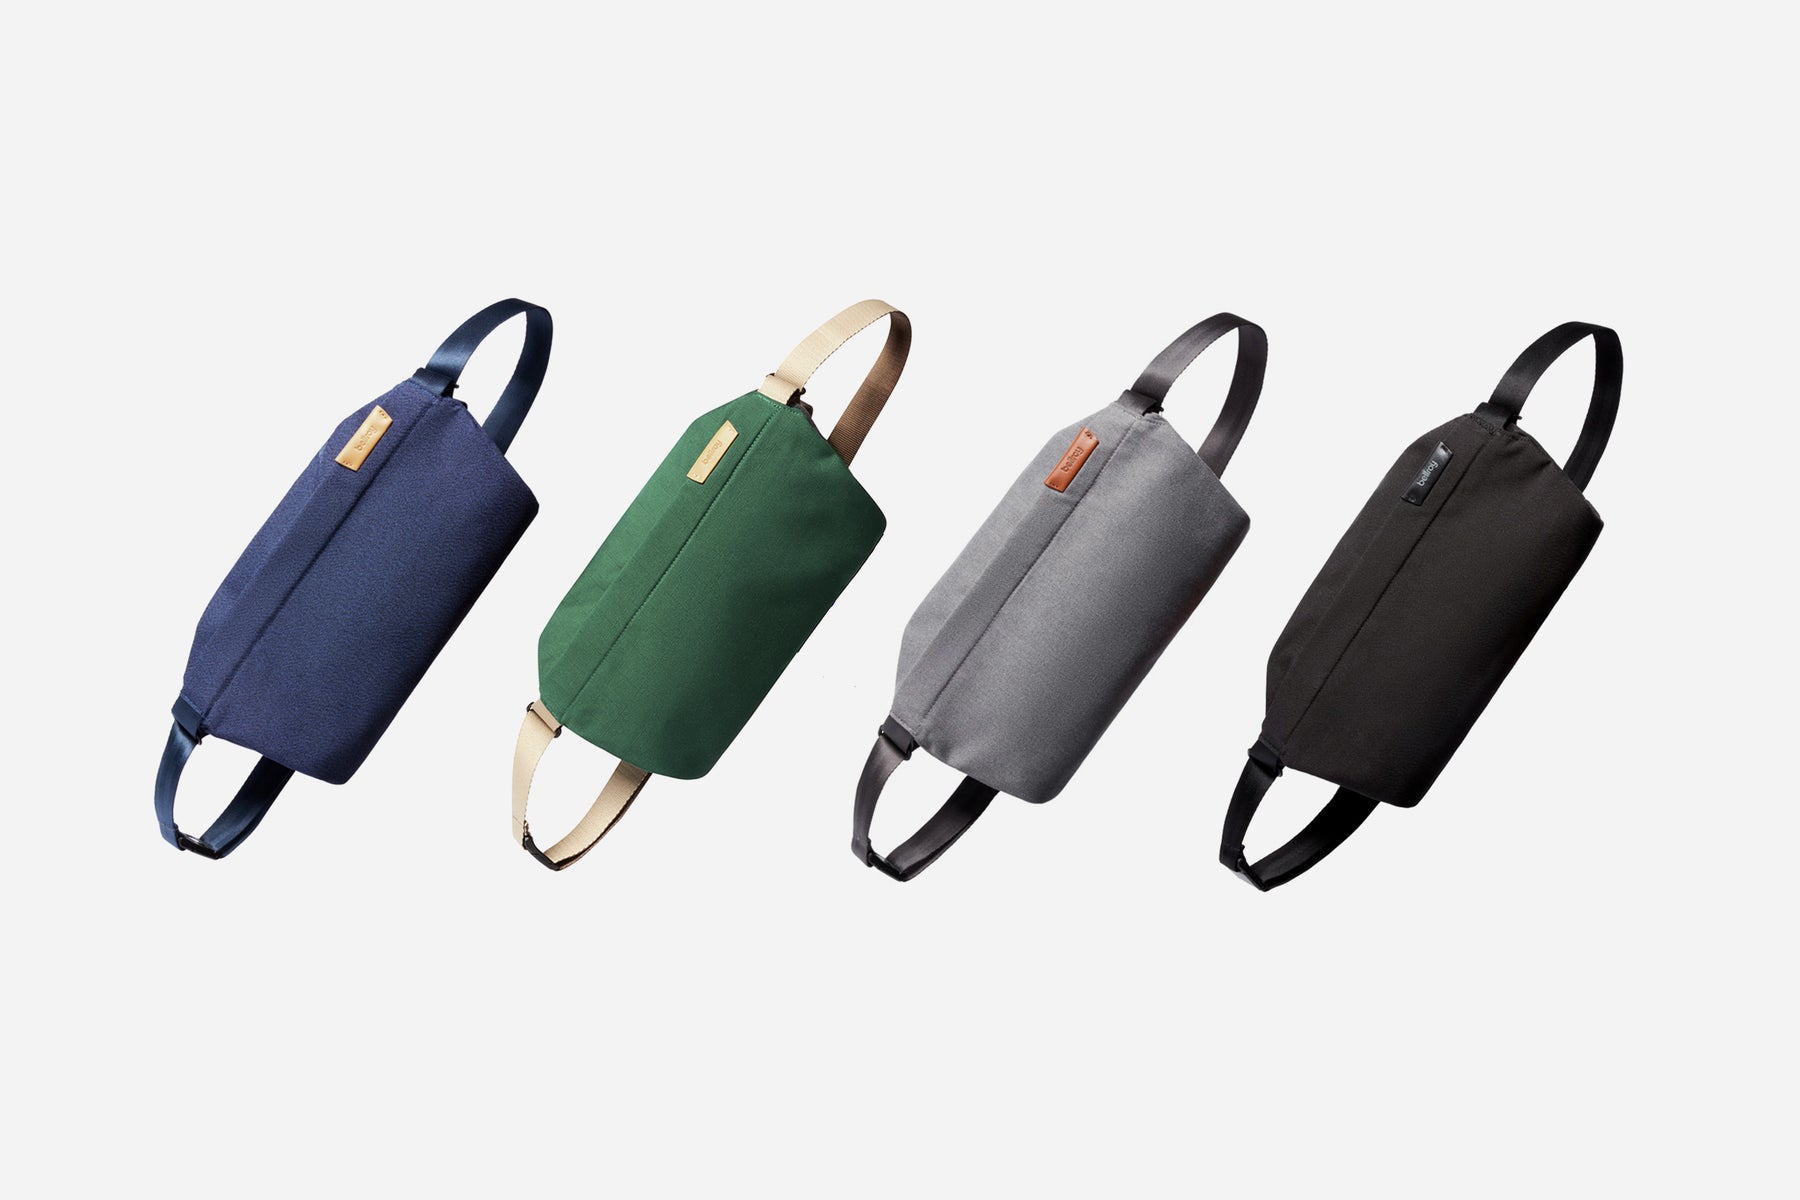 The Bellroy Sling Bag, An Introduction